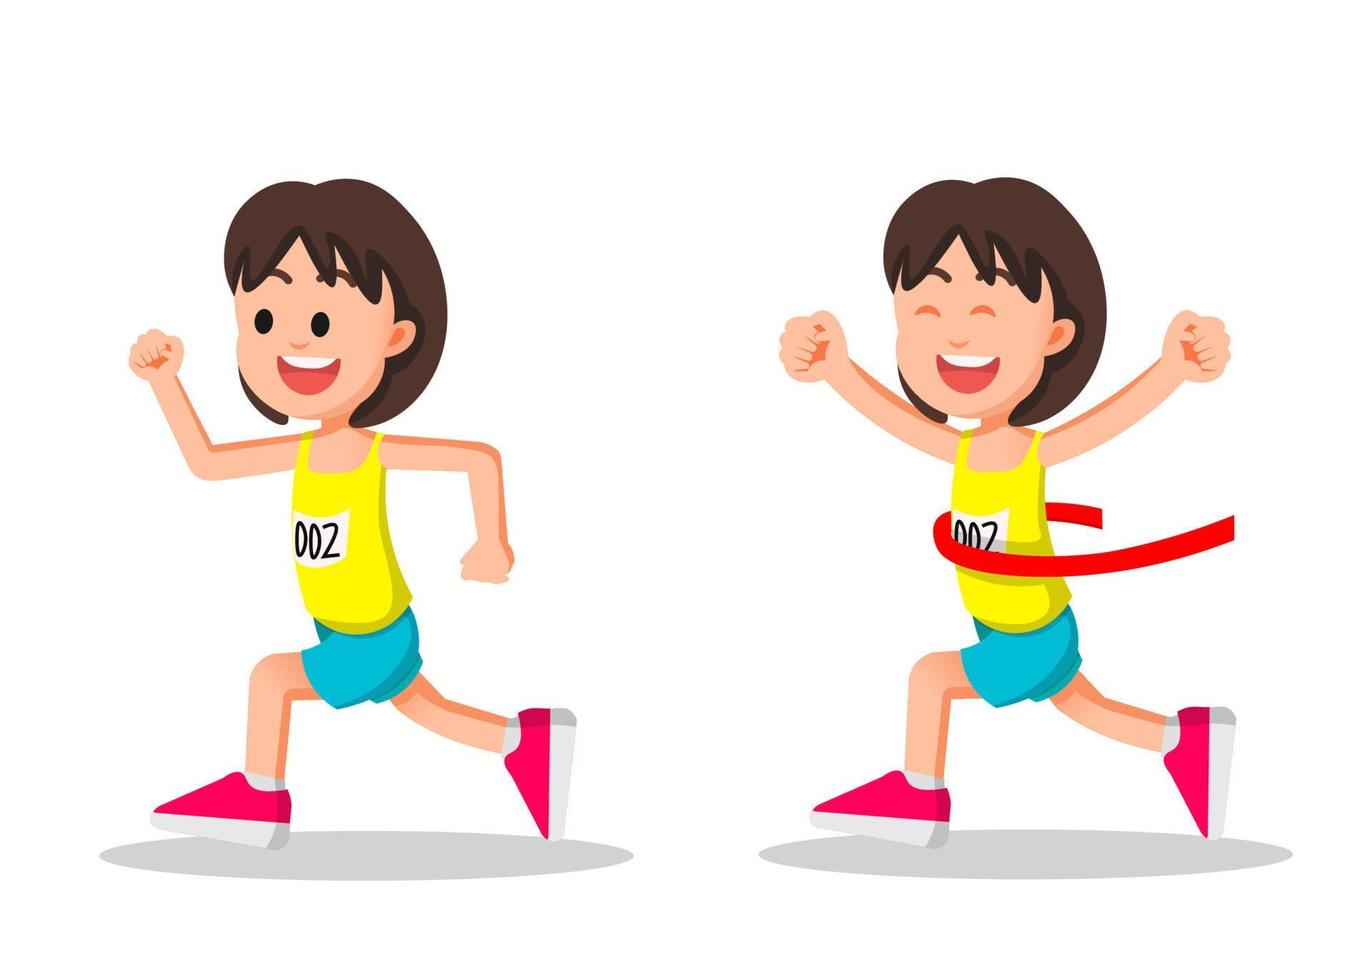 little girl reached the finish line and won the marathon competition vector